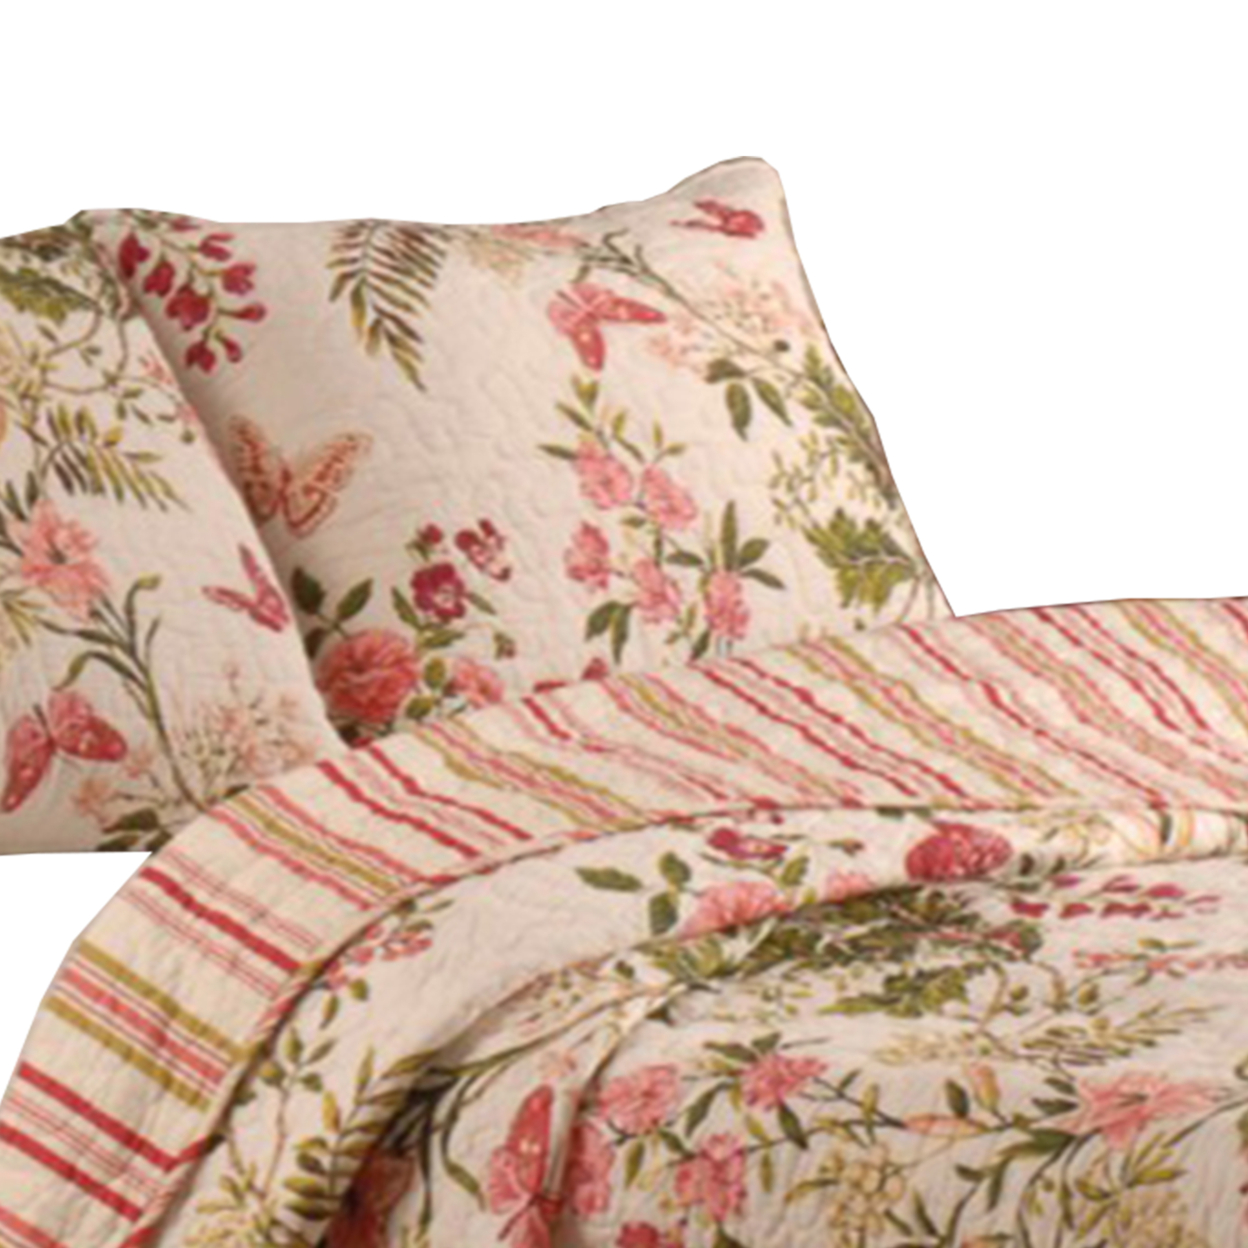 Atlanta Fabric 3 Piece Queen Size Quilt Set With Butterfly Print,Multicolor- Saltoro Sherpi